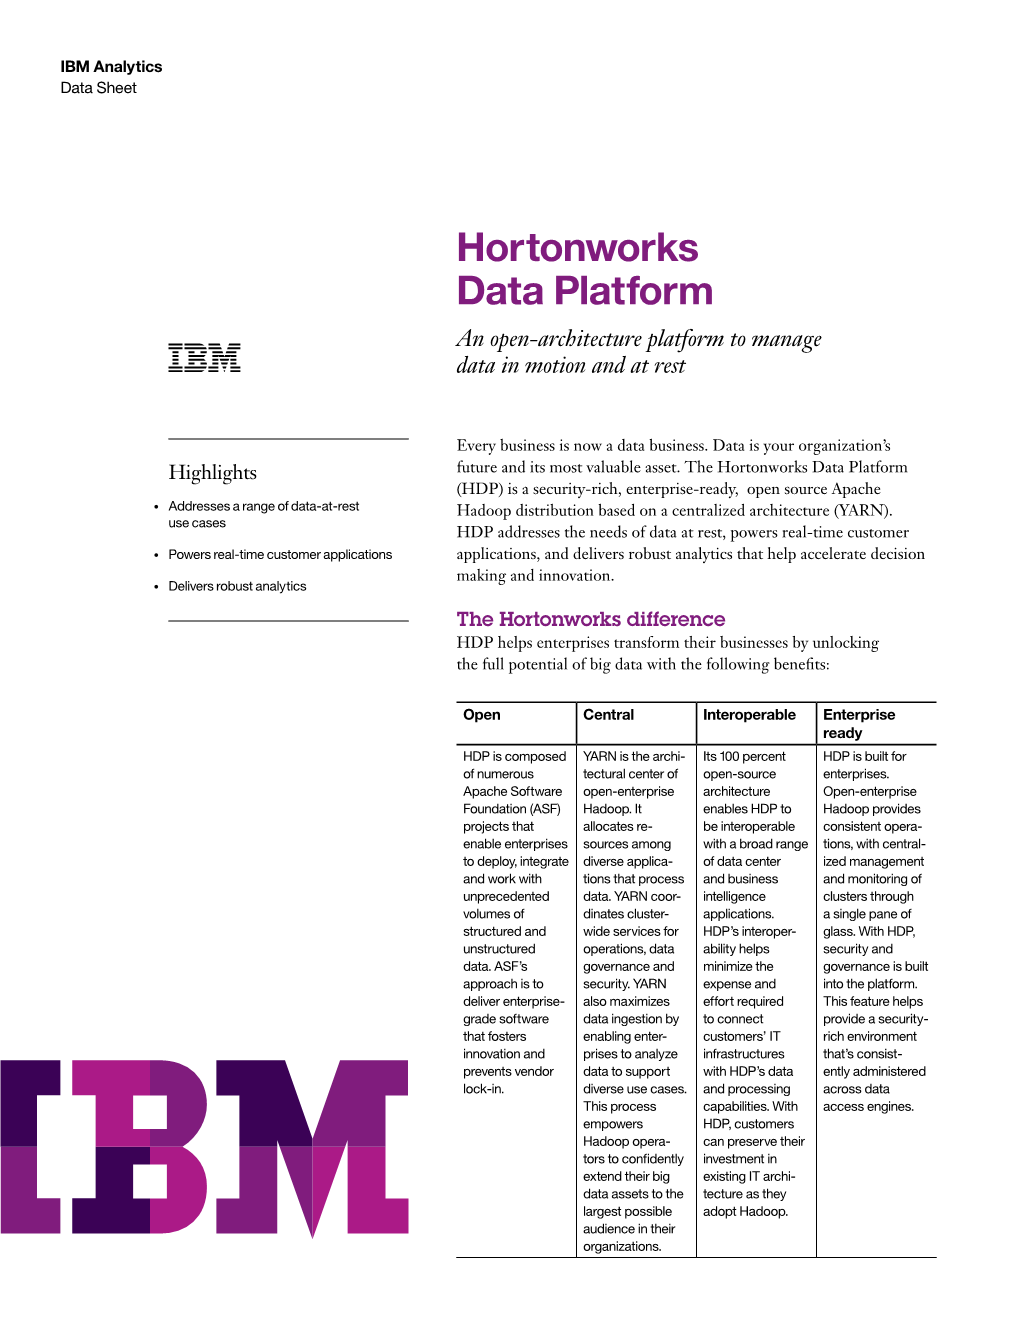 Hortonworks Data Platform an Open-Architecture Platform to Manage Data in Motion and at Rest